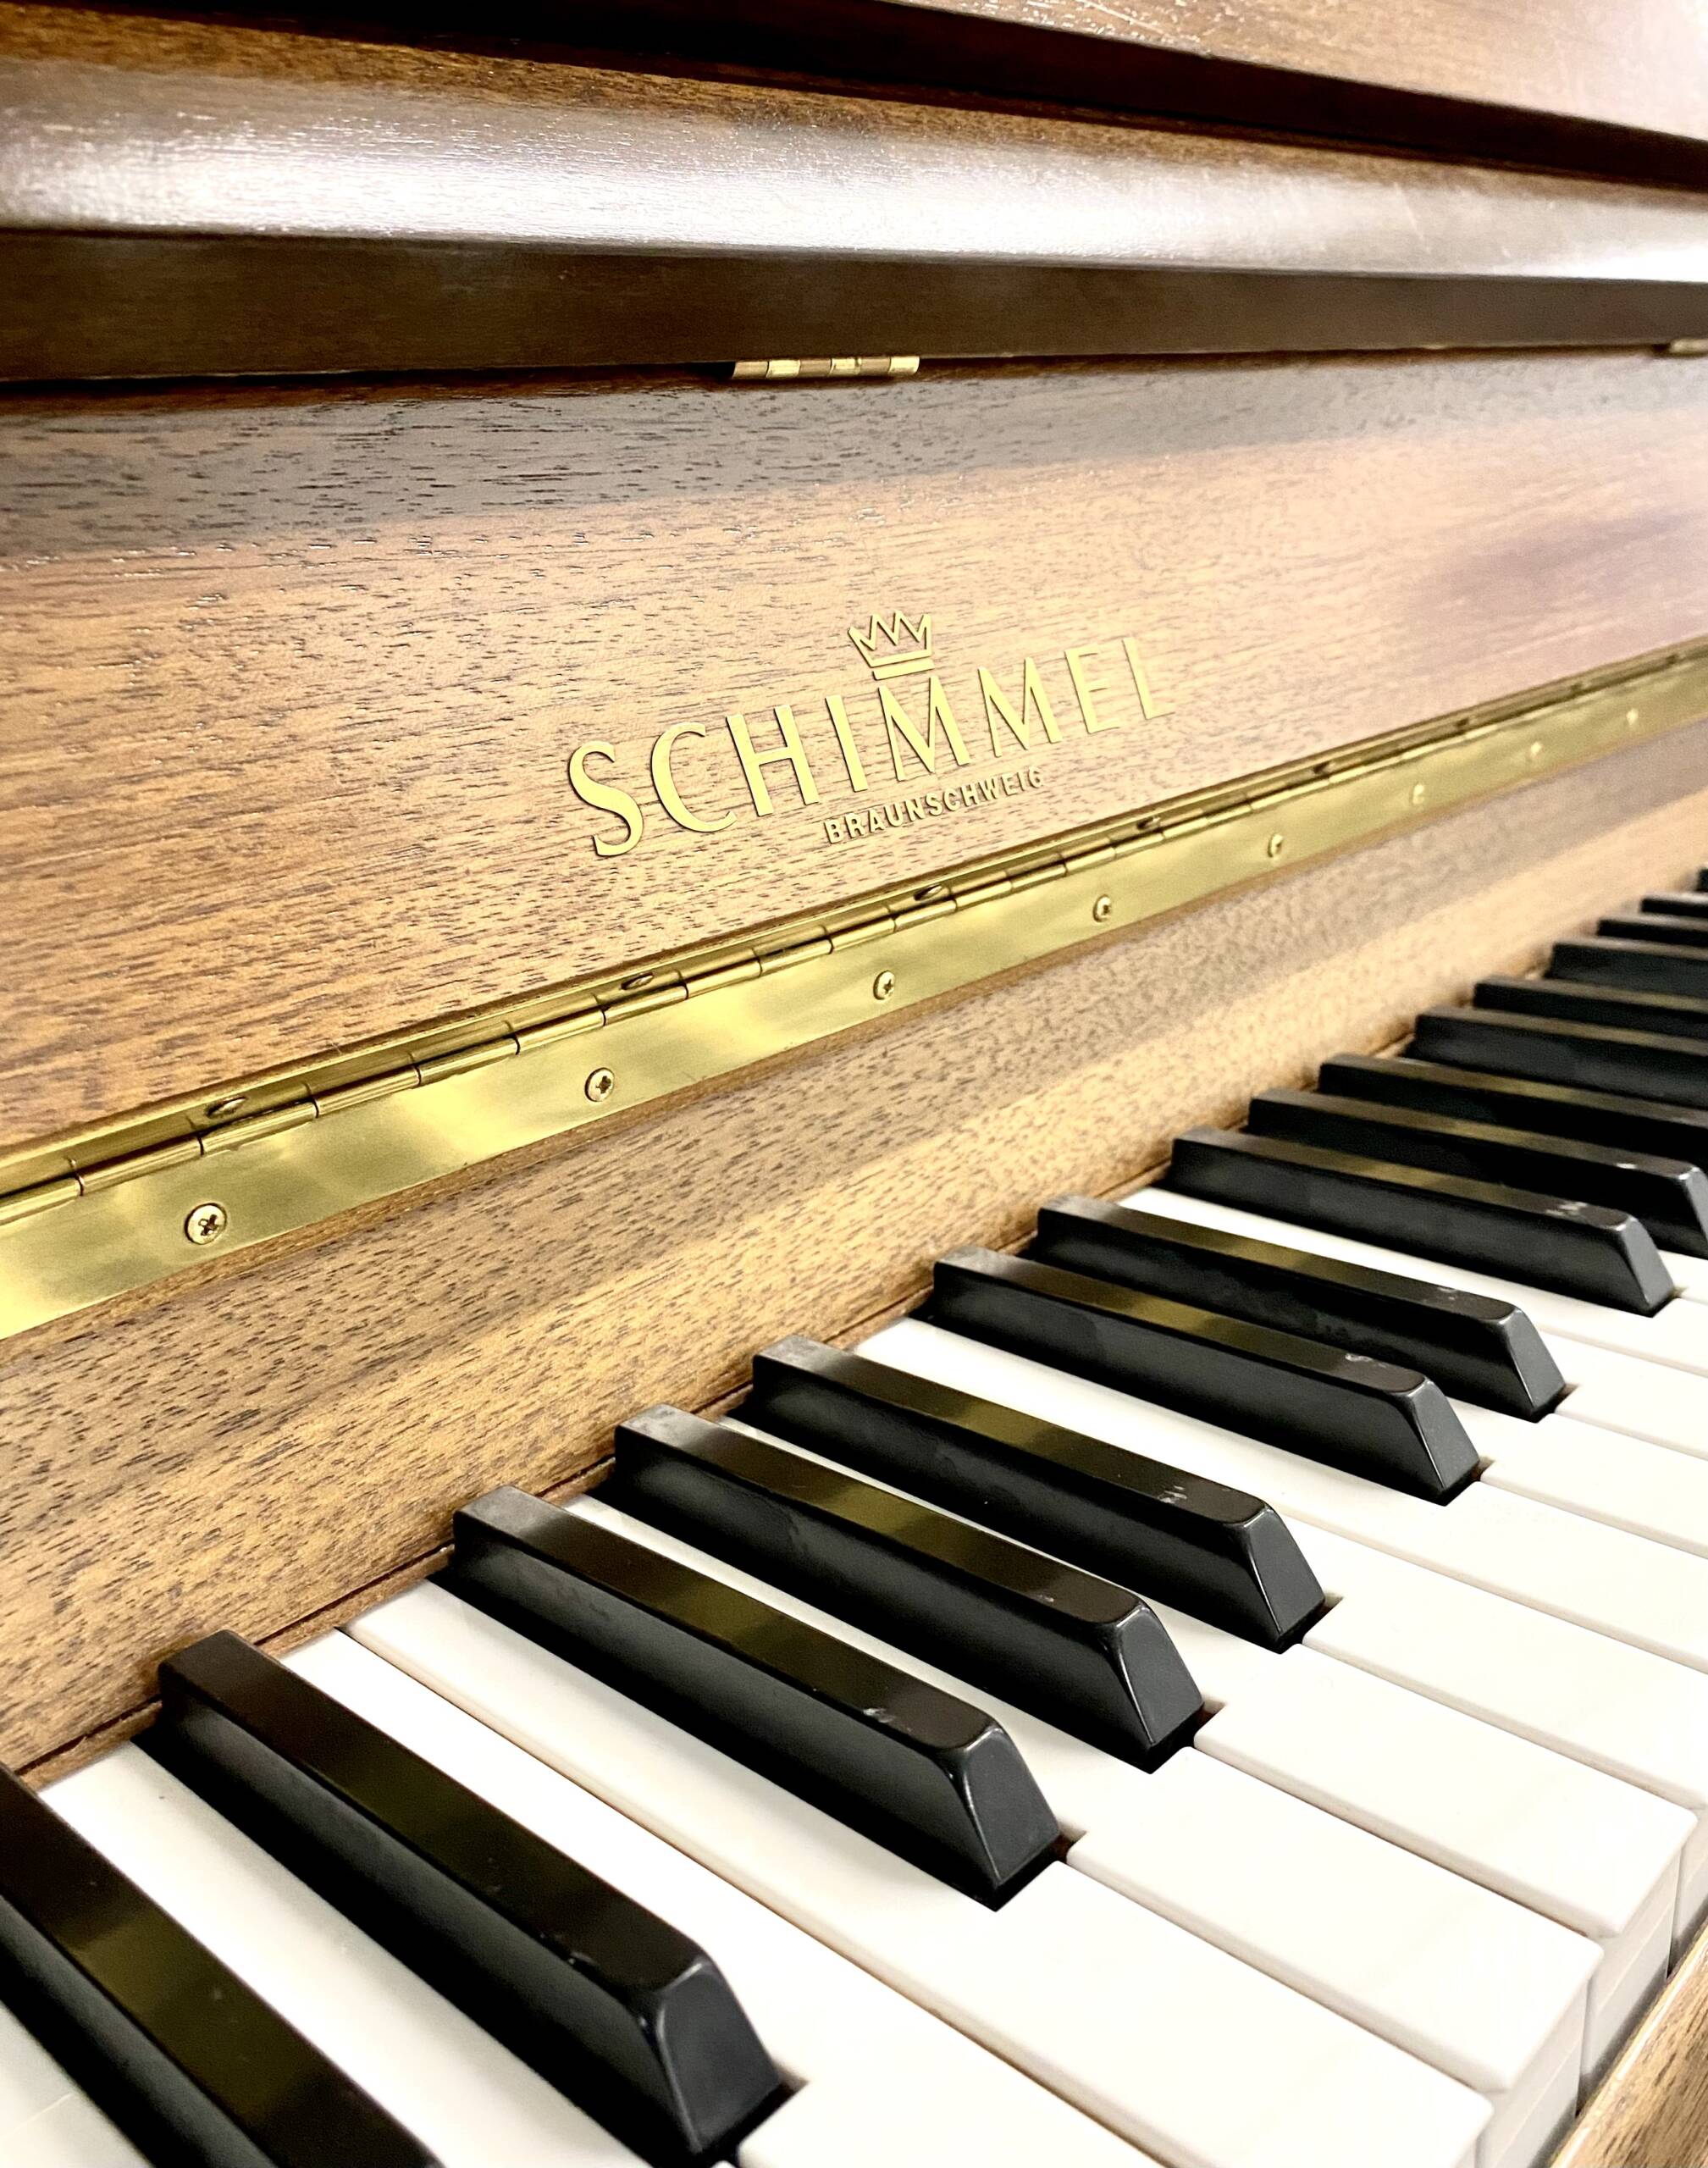 Schimmel German Upright Piano for sale UK  P I A N O Z - The Ultimate  Online Piano Showroom - UK Piano Shop - Black Baby Grands